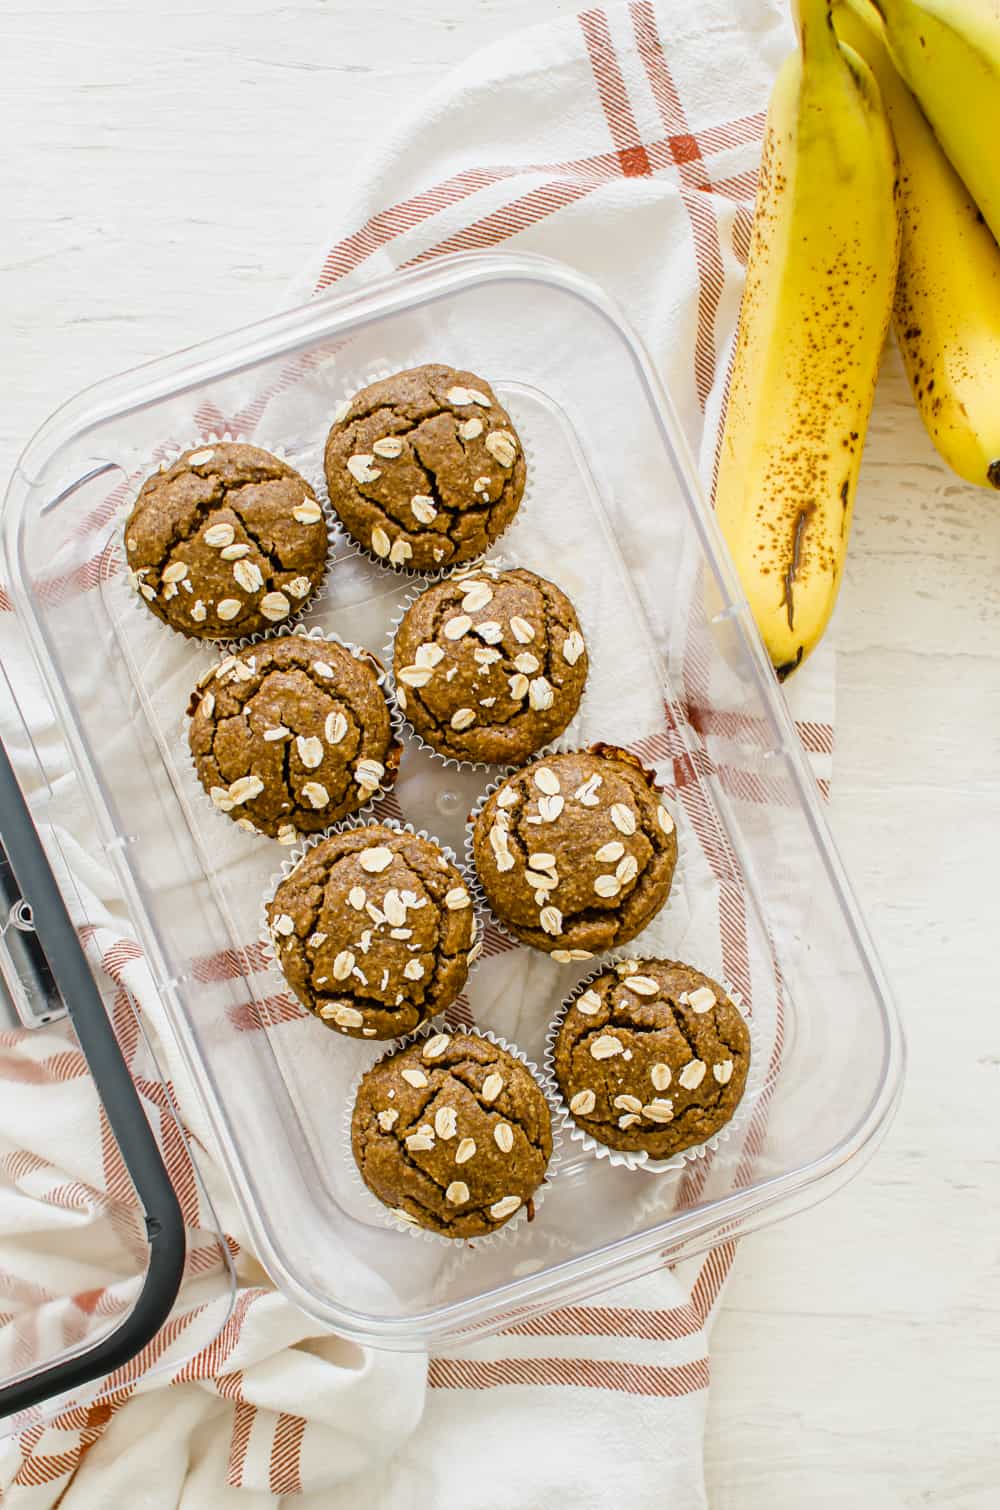 Gluten-free banana muffins in a freezer-safe container ready for the freezer.